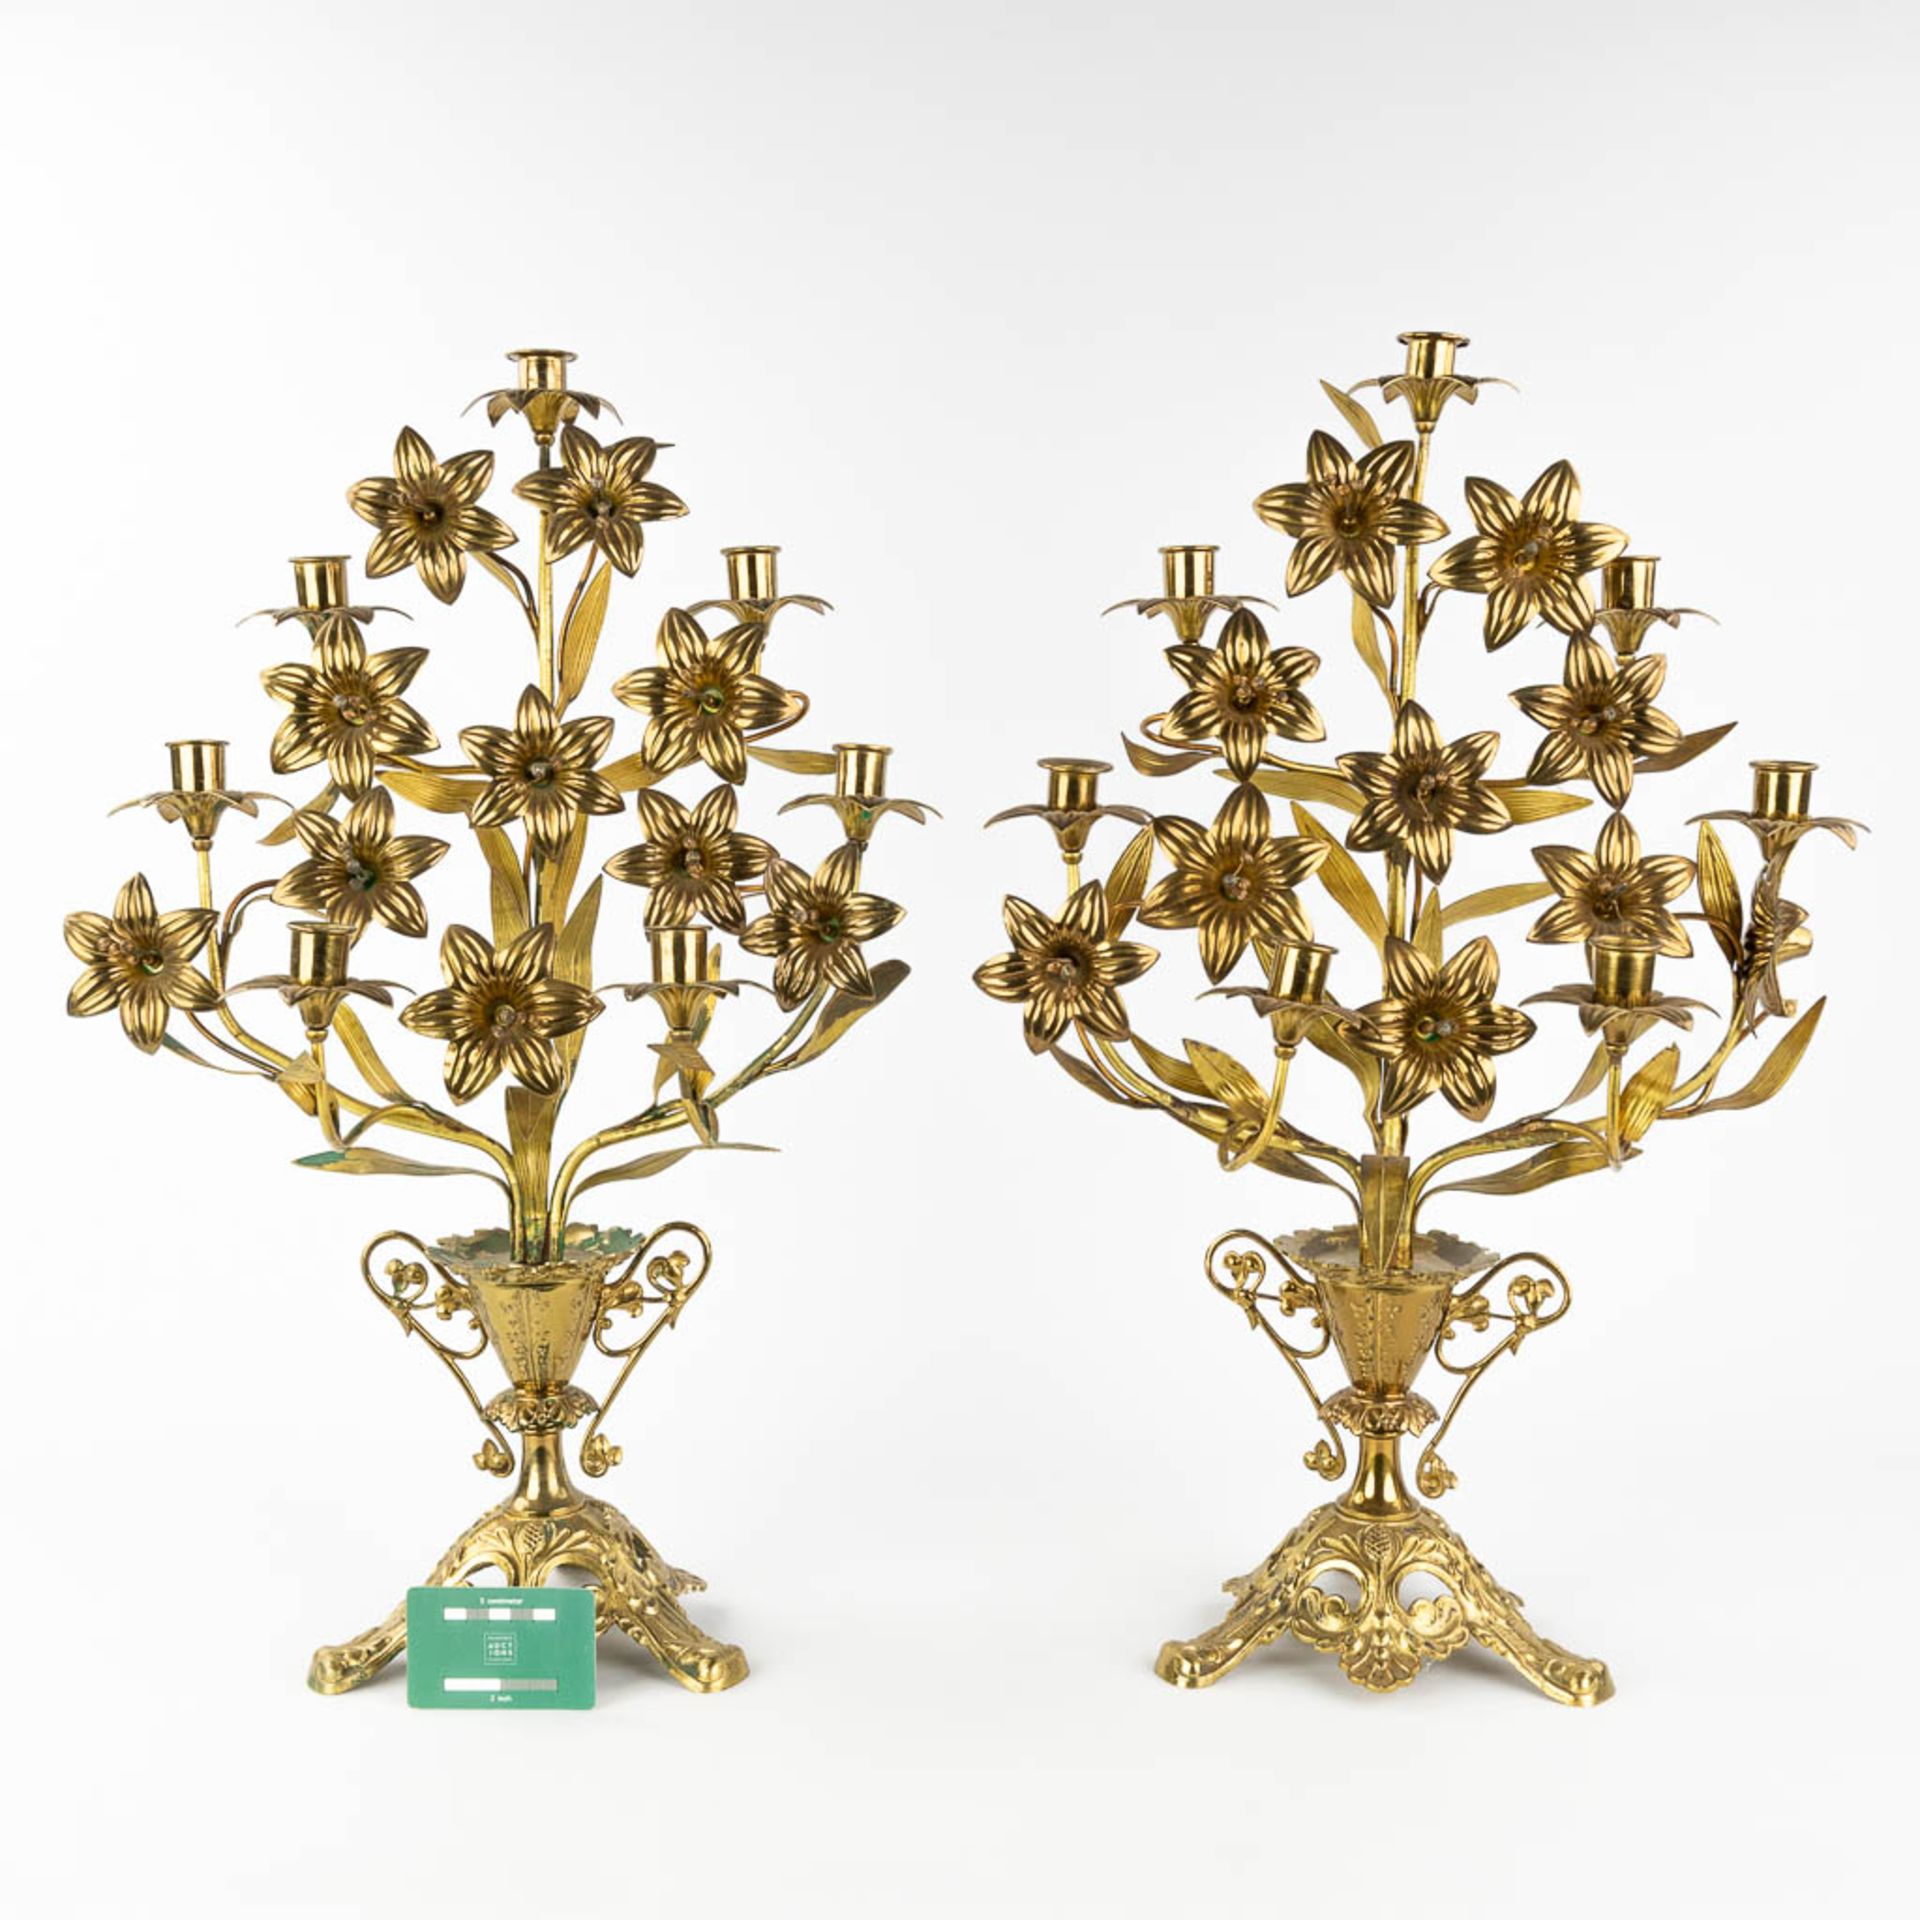 A pair of Church candlesticks, bronze and decorated with flowers. (L: 23 x W: 38 x H: 53 cm) - Image 2 of 13